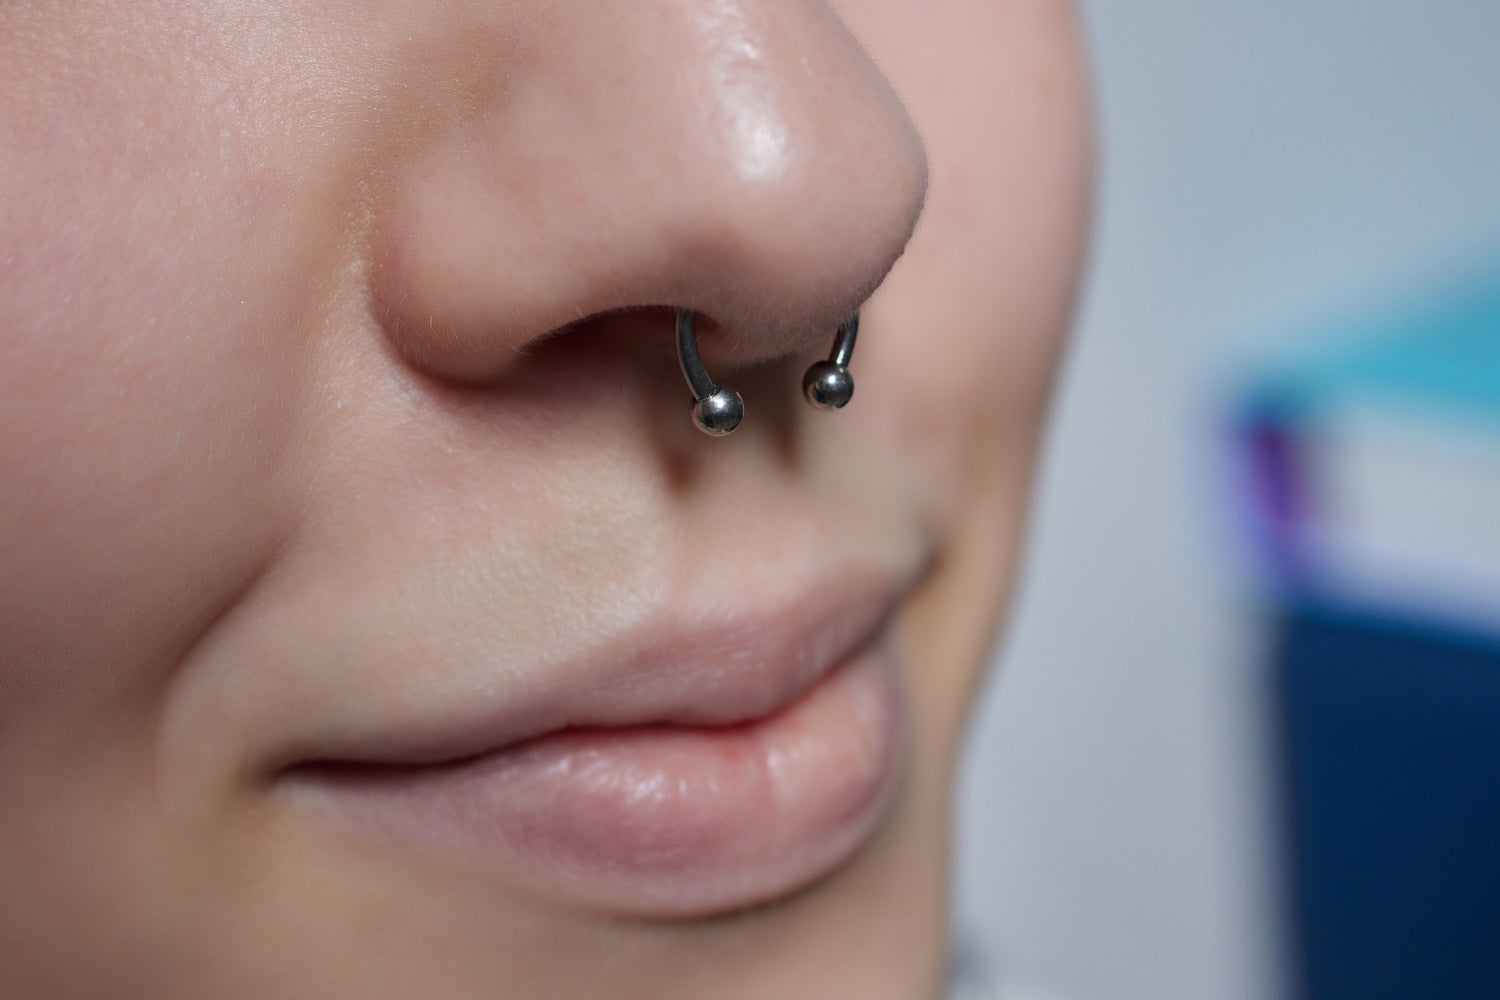 A close up of a septum piercing on a woman with a small circular barbell in it.